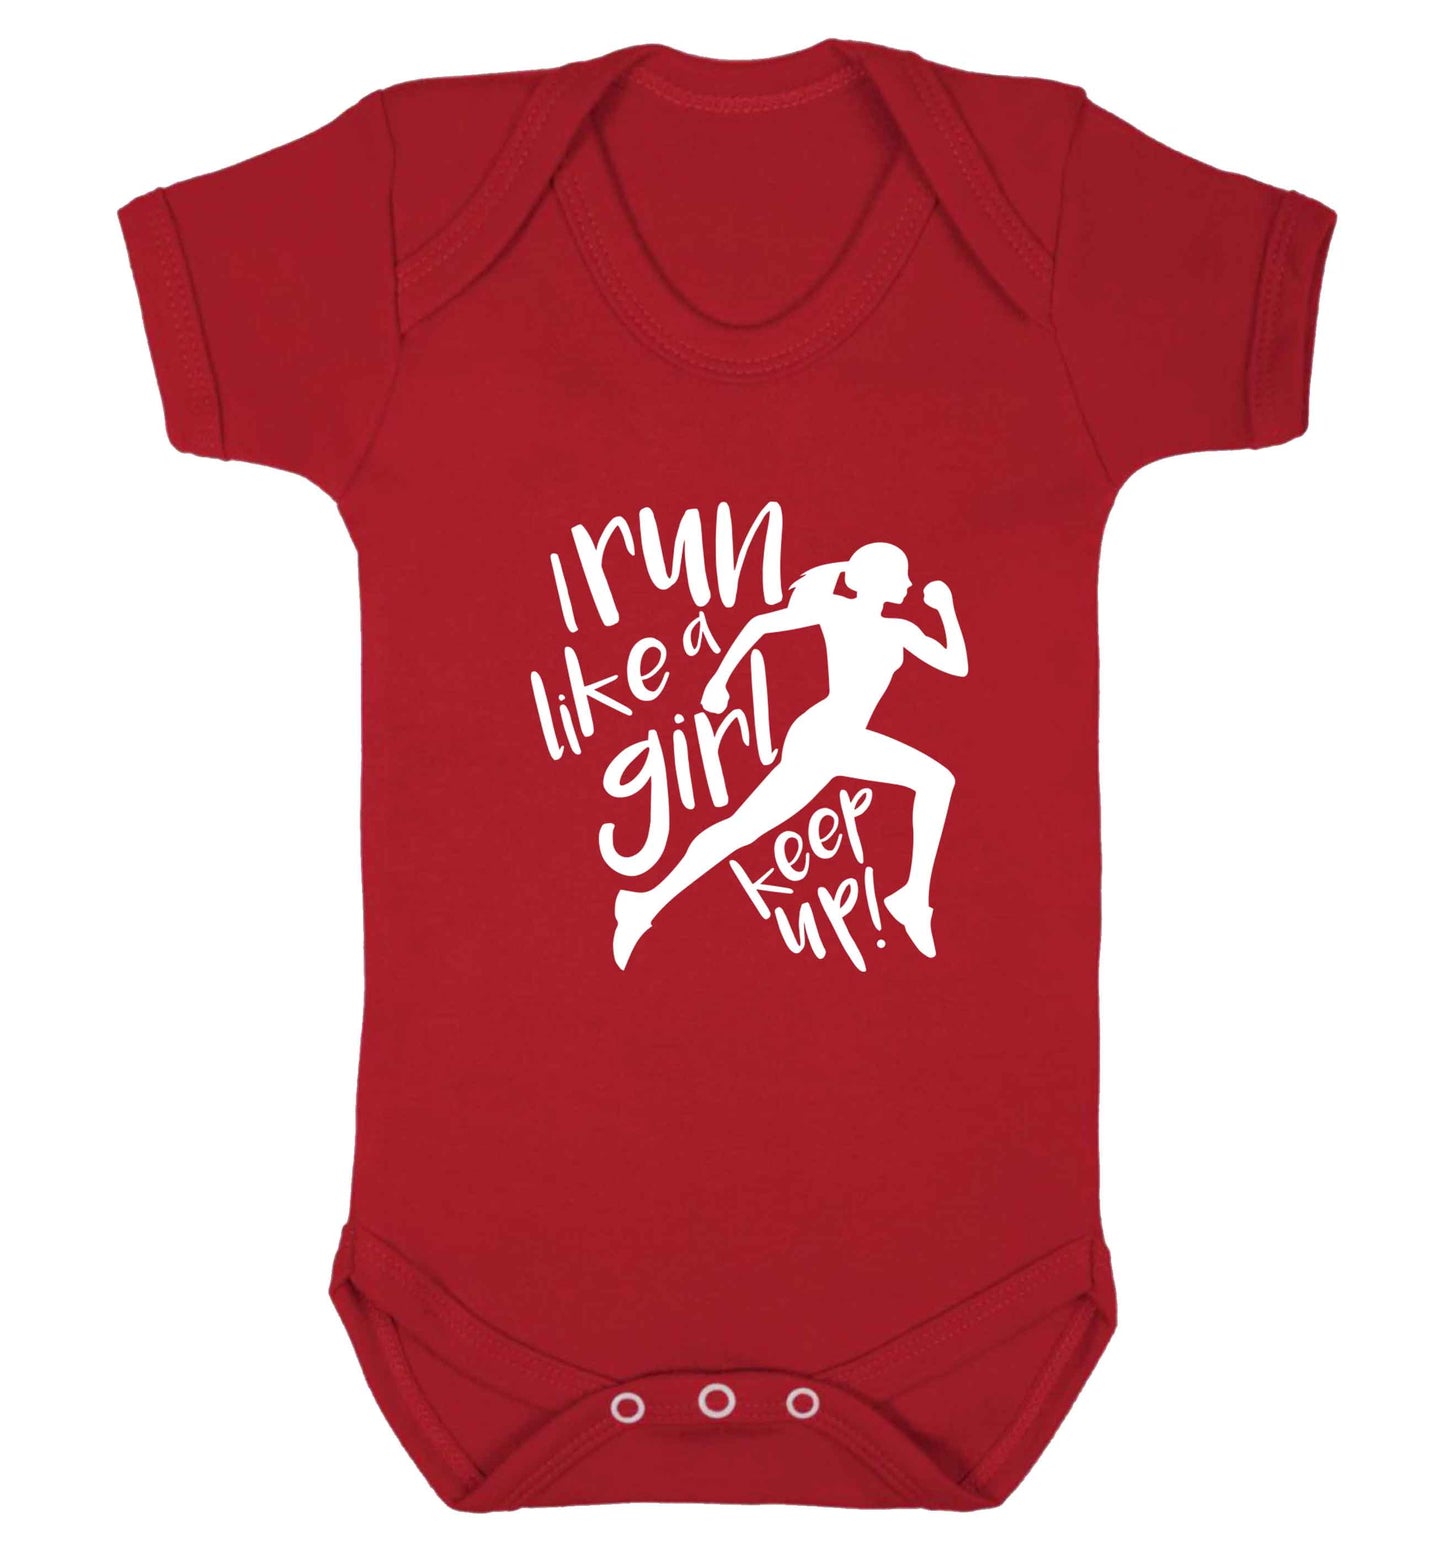 I run like a girl, keep up! baby vest red 18-24 months